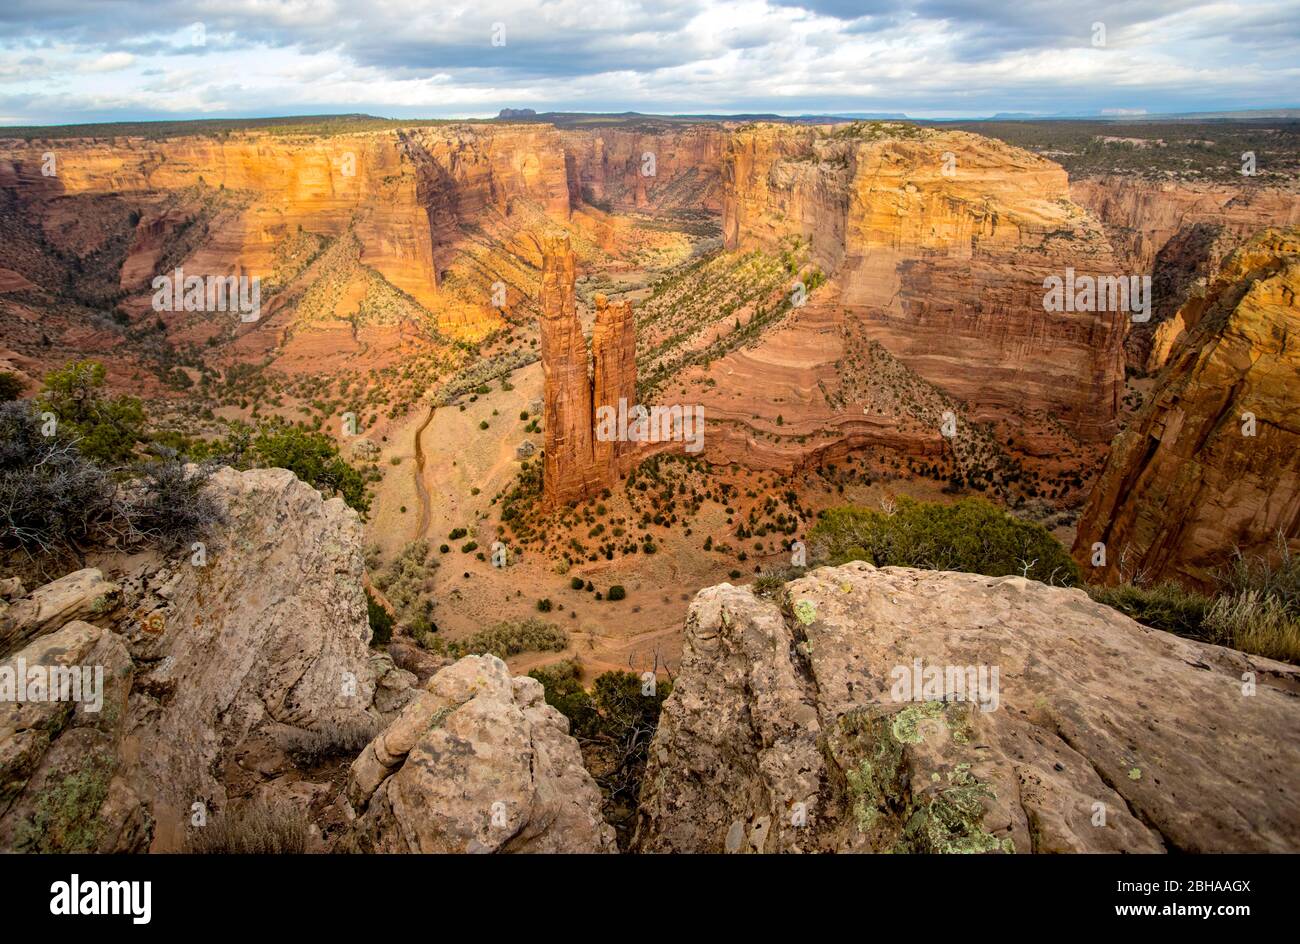 View of Spider Rock Canyon de Chelly National Monument, Utah, USA Stock Photo